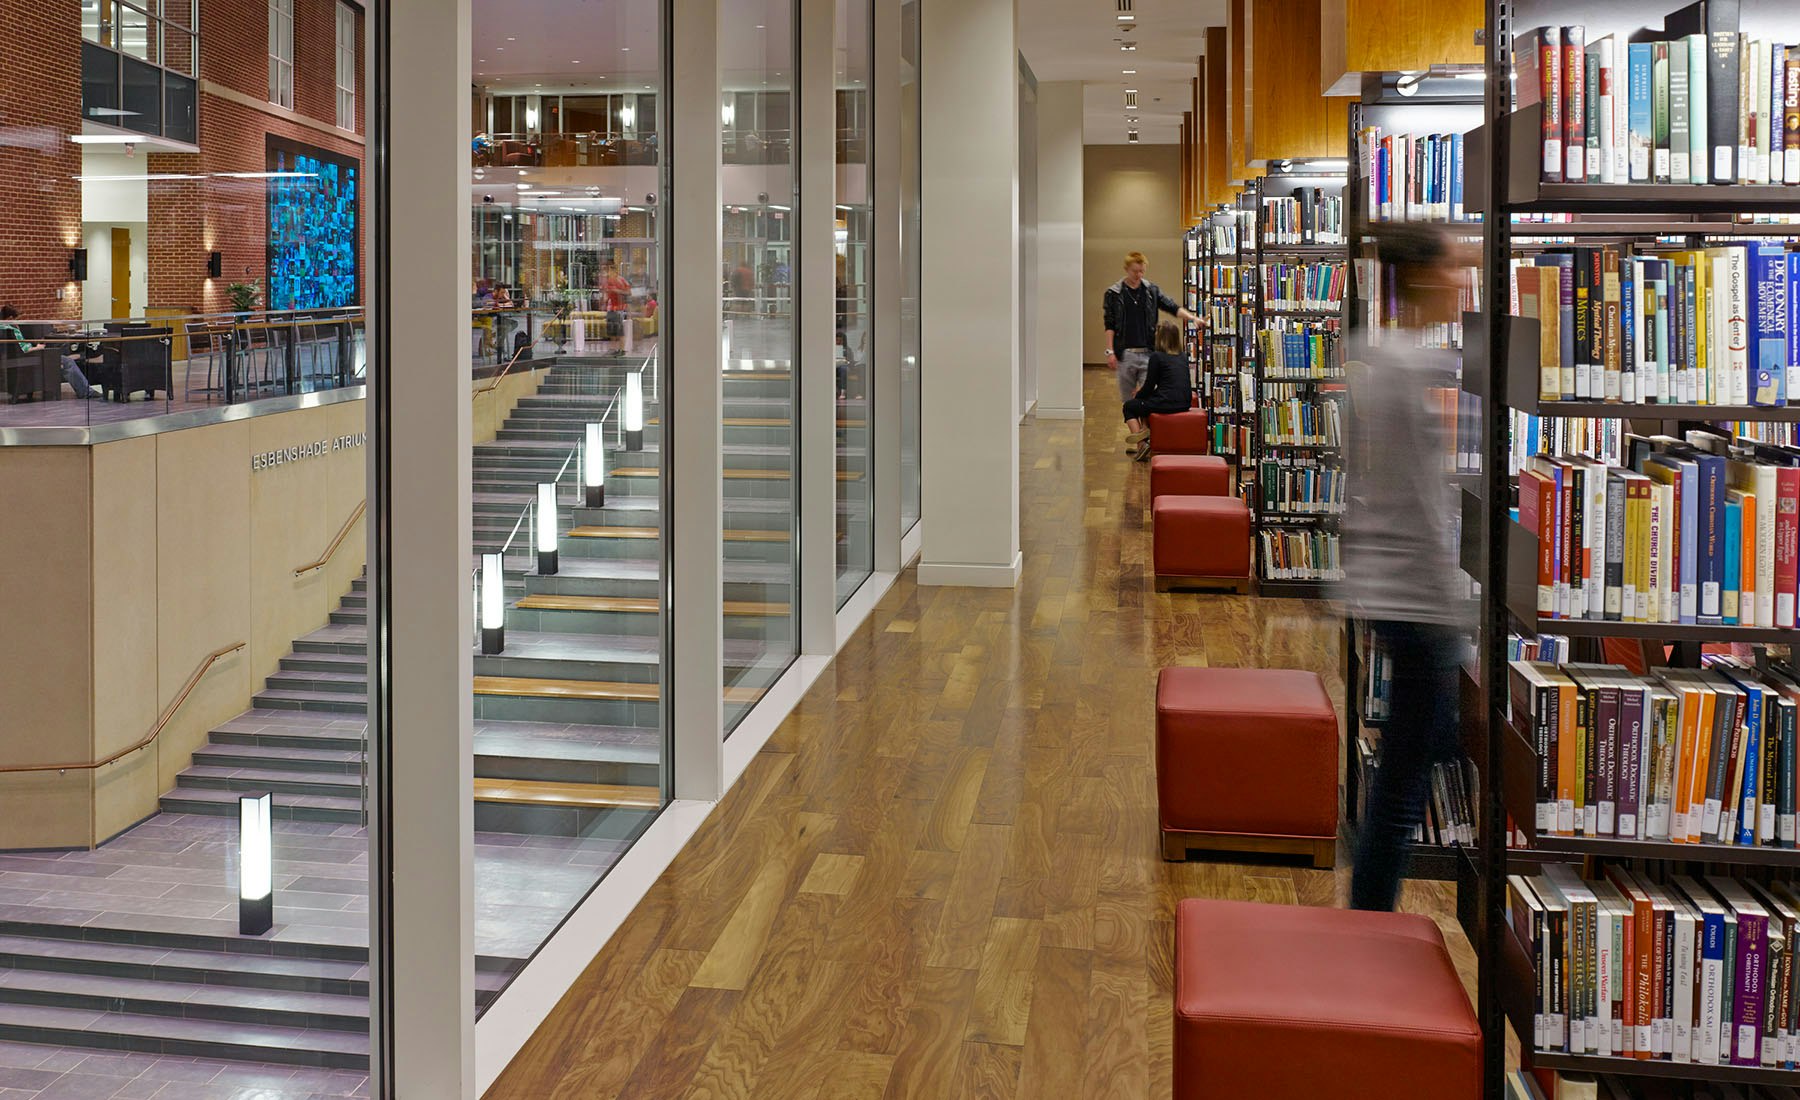 Compared to prototypical libraries of the past, Liberty’s new flagship library reverses the notion of book storage as the central motive of a library’s design in favor of a user-centric layout that places student activity in the foreground. 